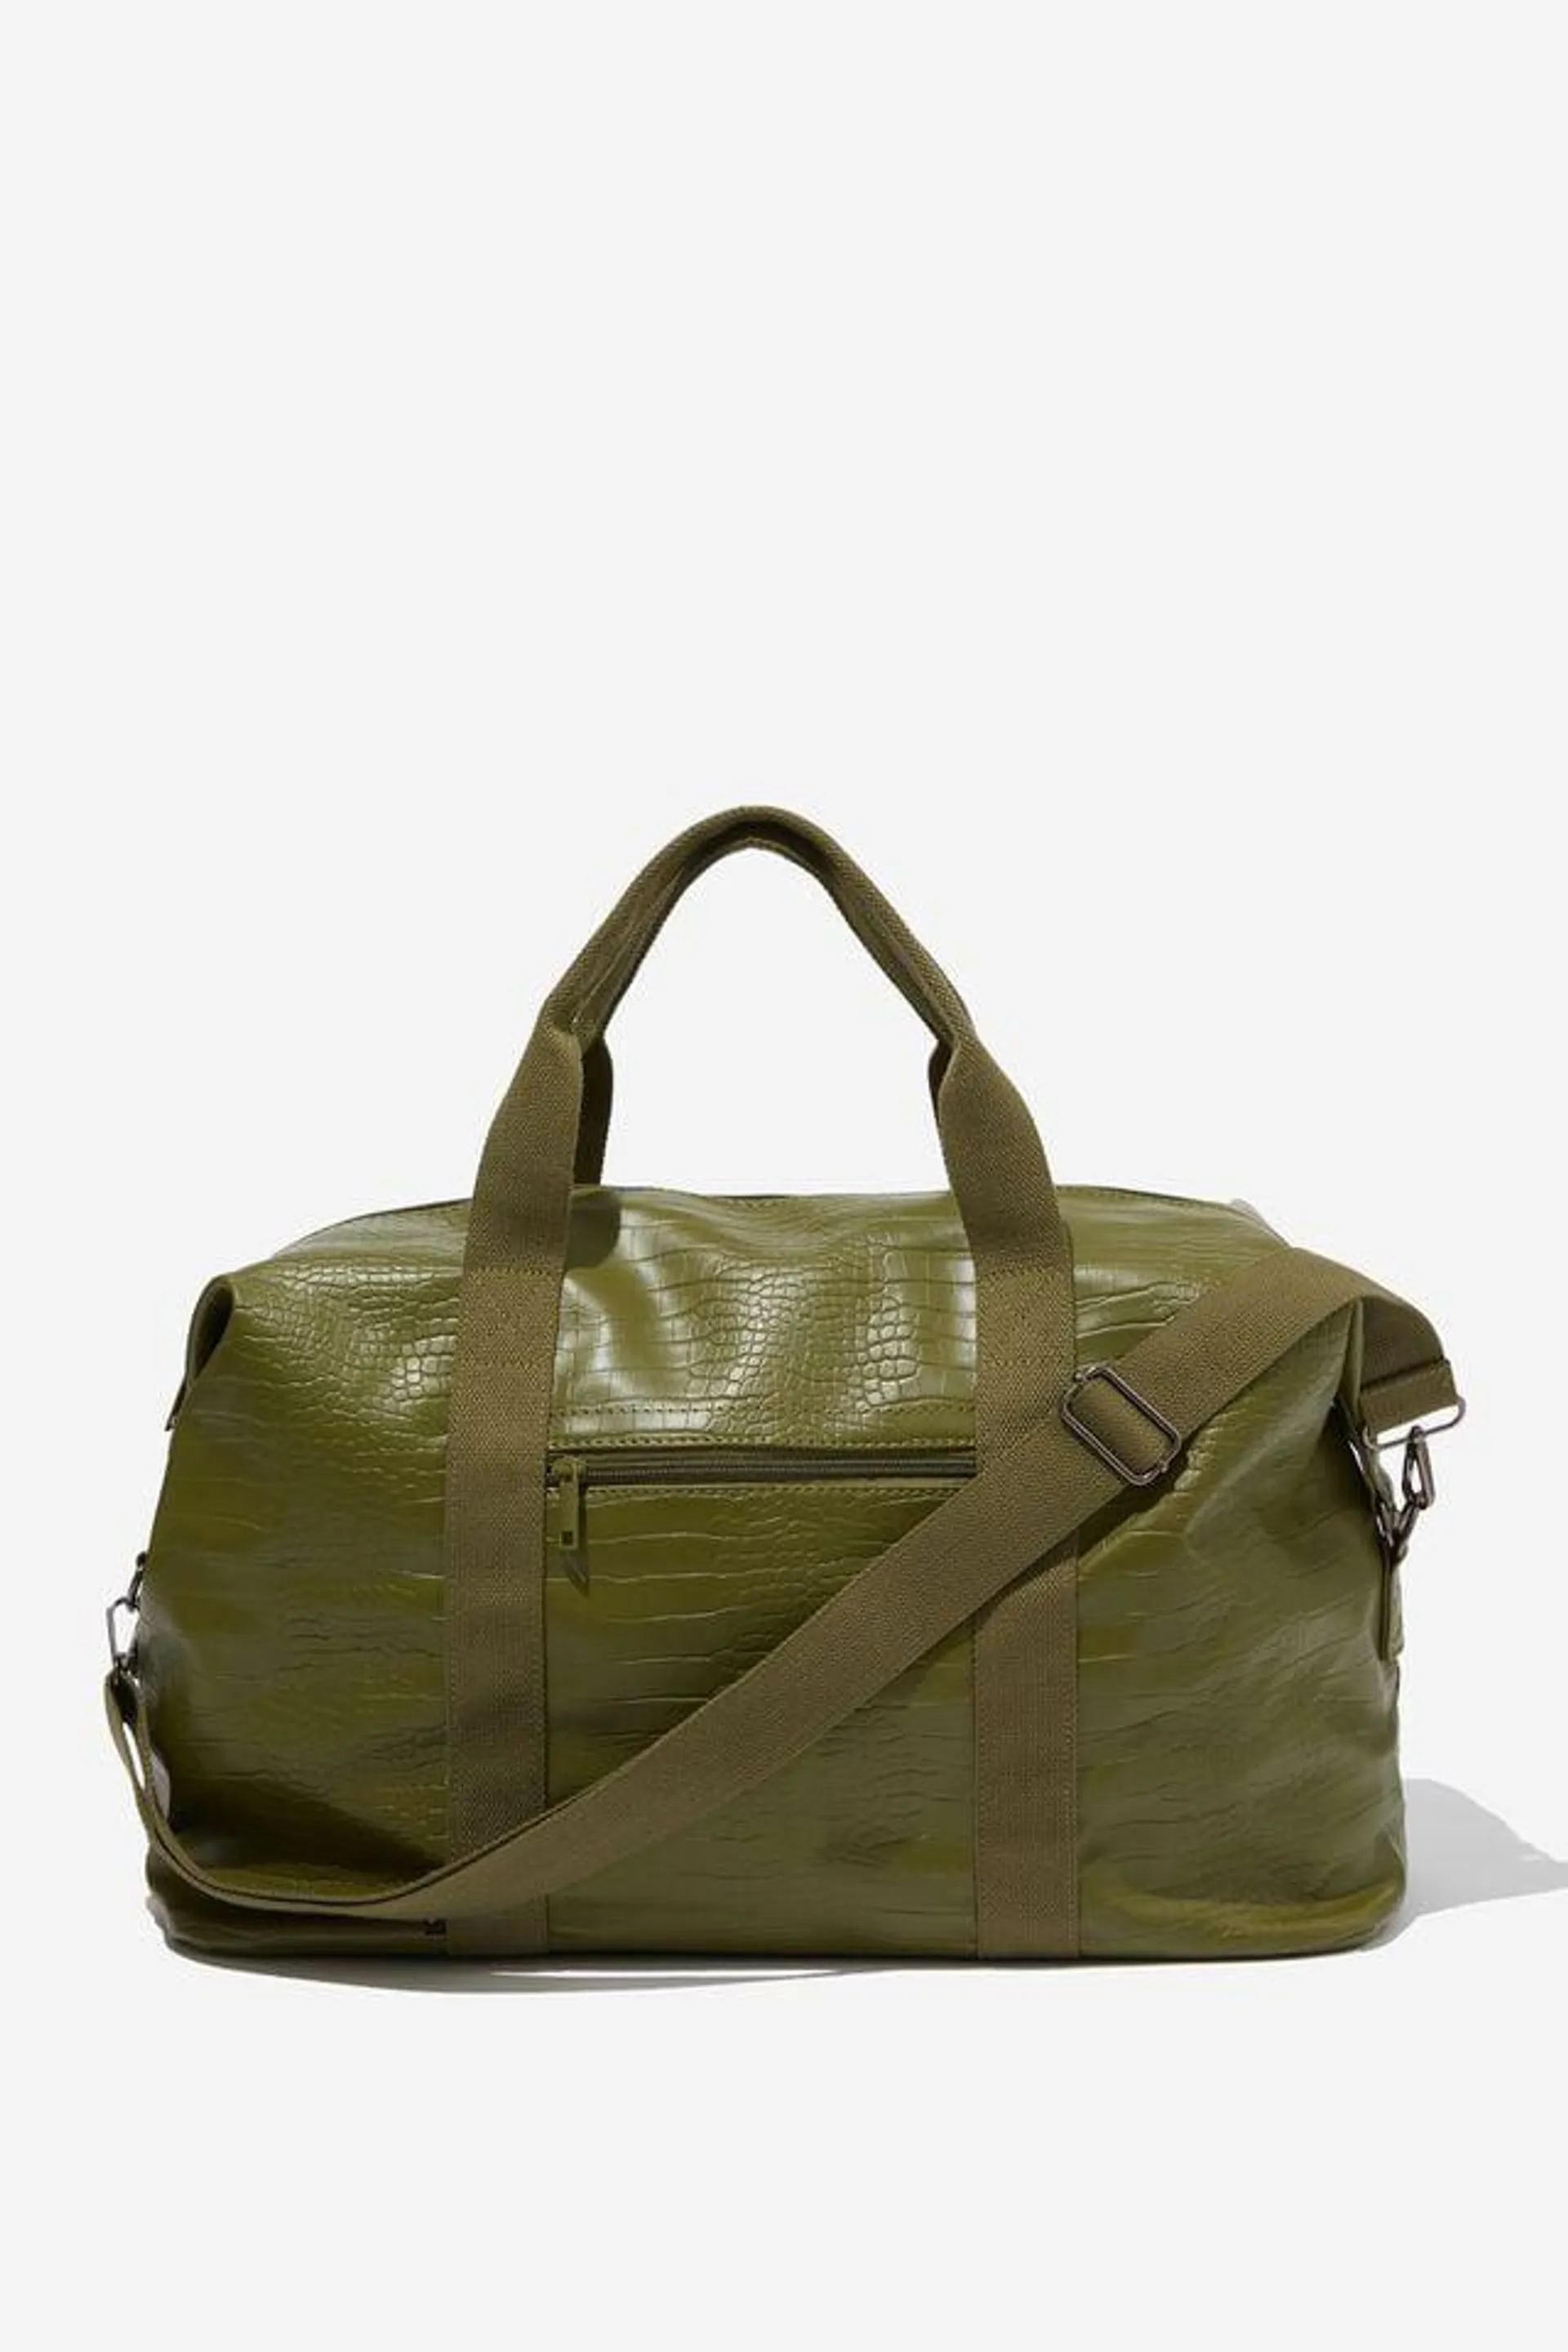 Off The Grid Hold All Duffle Bag